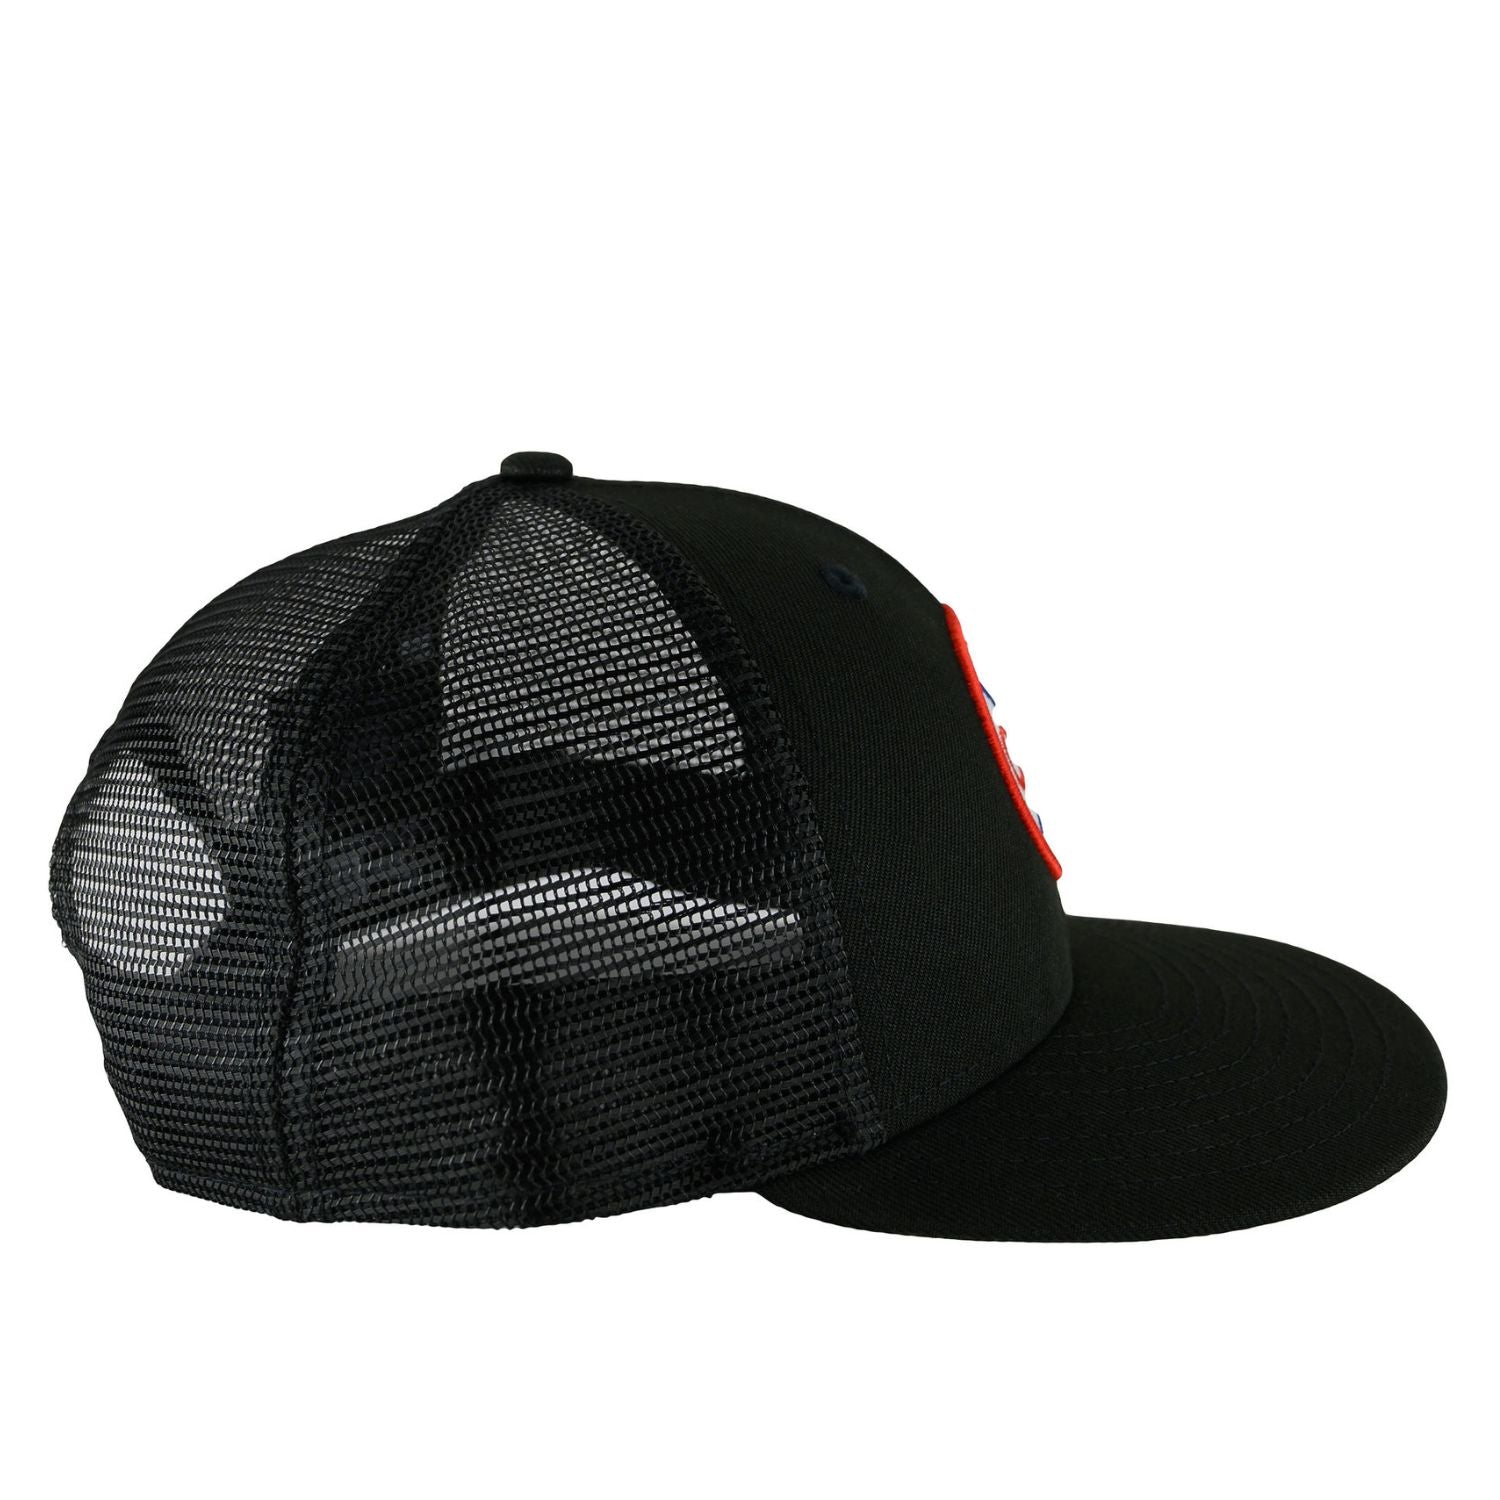 Cooper City High School Cowboys Embroidered Fanthread™ Mesh Back Cap